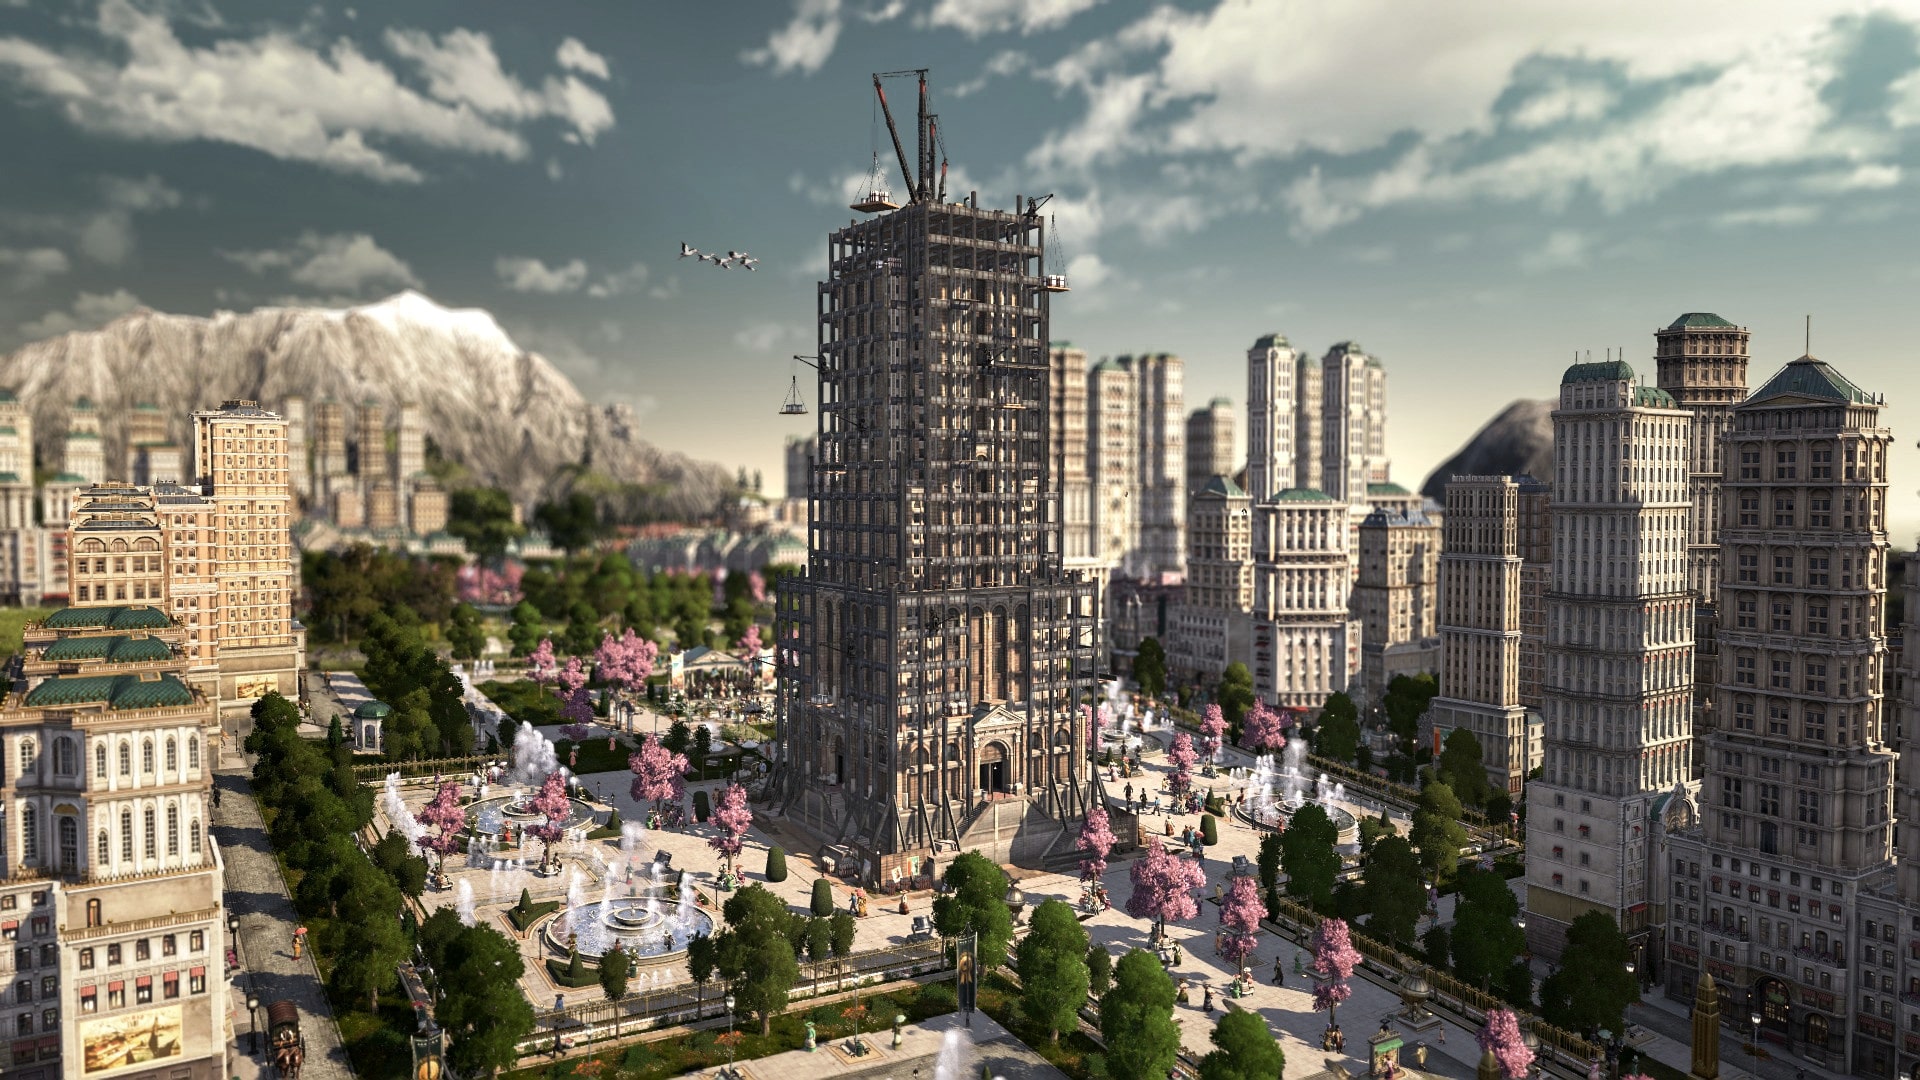 The Skyline Tower is a new end-game challenge and the tallest building in Anno 1800.The Skyline Tower is a new end-game challenge and the tallest building in Anno 1800.